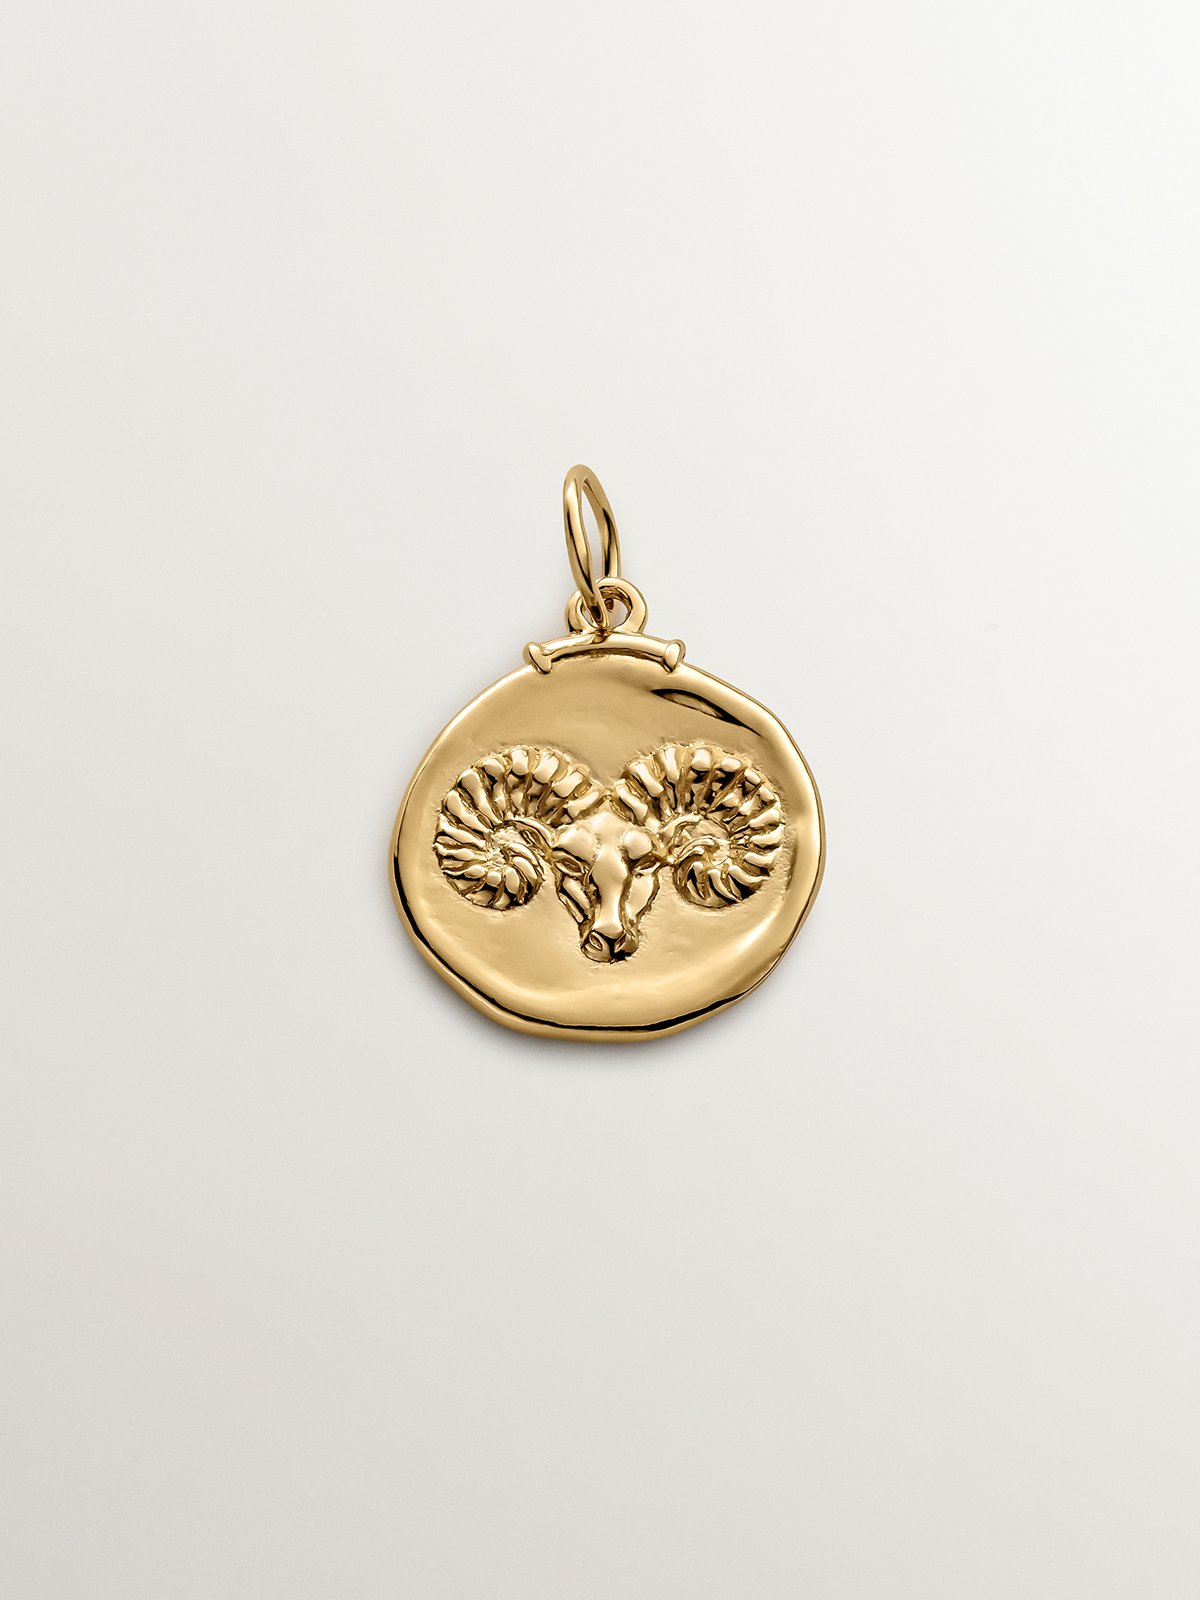 Aries Charm made of 925 silver bathed in 18K yellow gold.